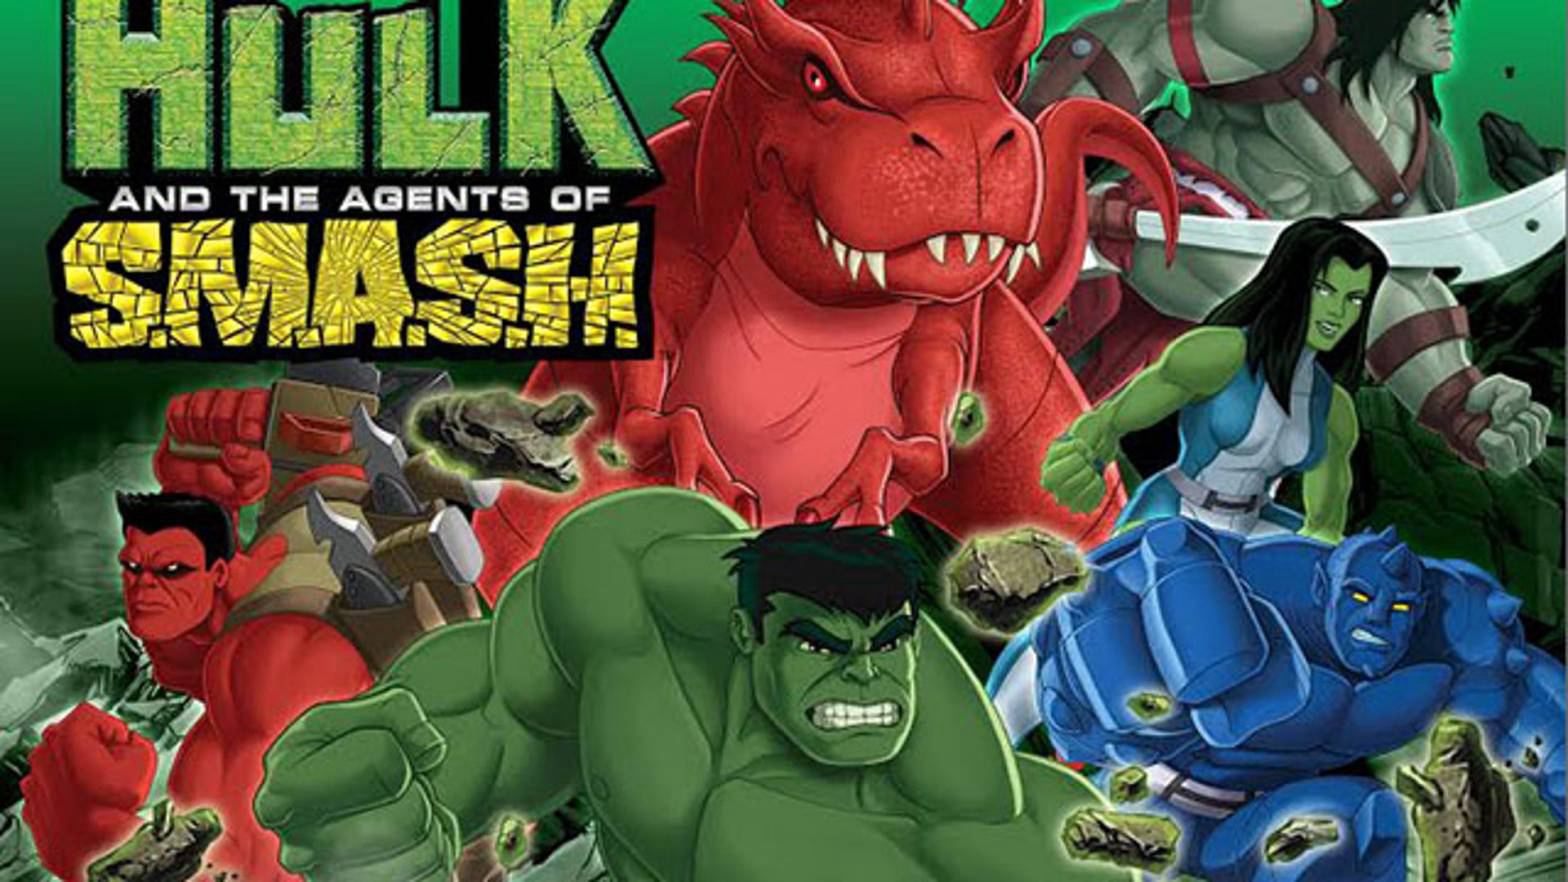 Hulk And The Agents Of S.M.A.S.H. / Hulk And The Agents Of S.M.A.S.H. (2013)